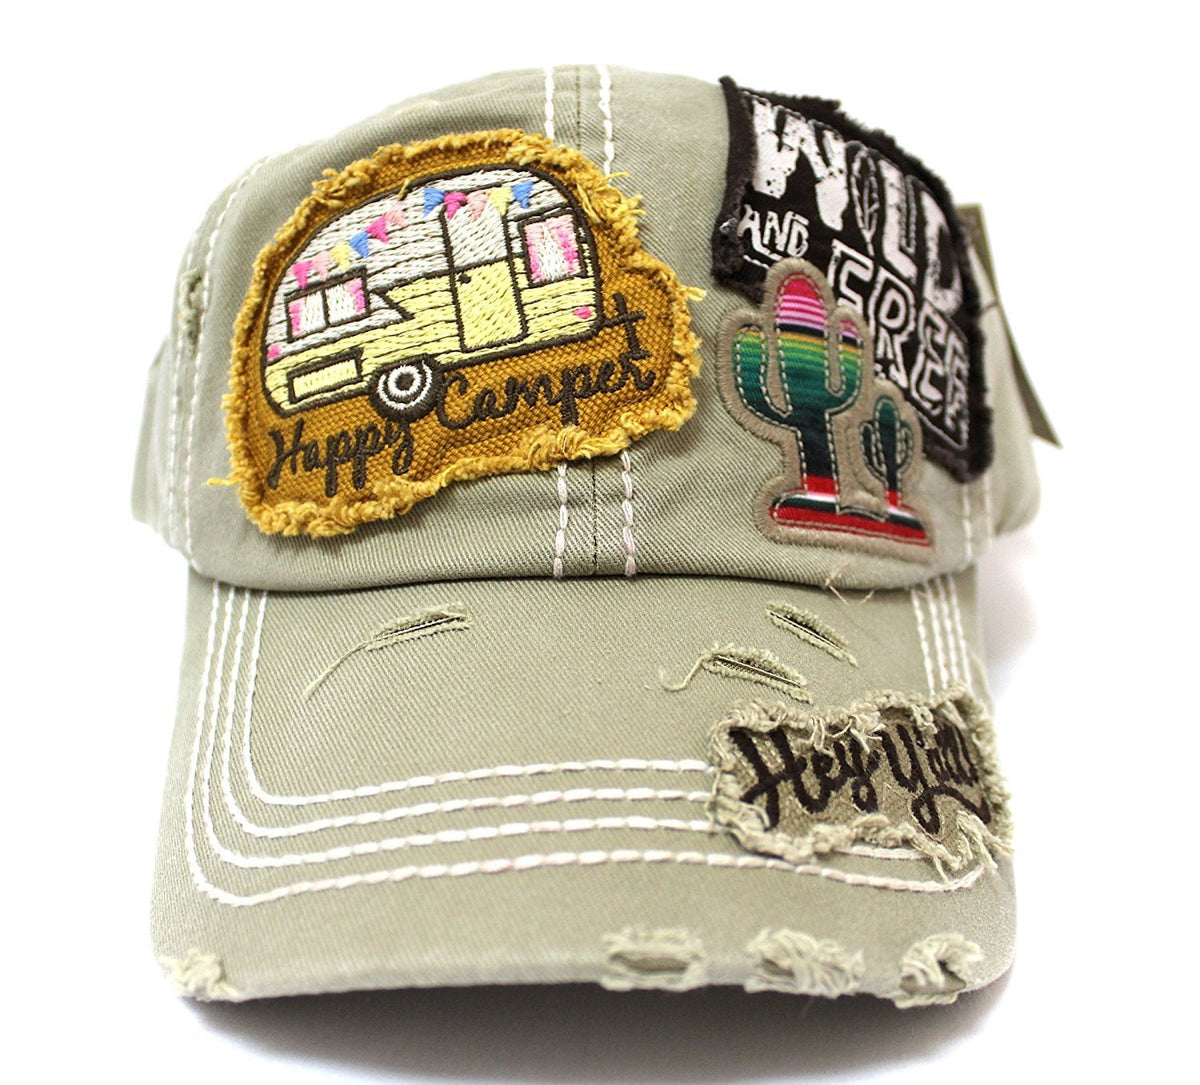 Khaki "Y'ALL, HAPPY CAMPER, WILD FREE" Multi-Patch Embroidered Adjustable Cap - Caps 'N Vintage 